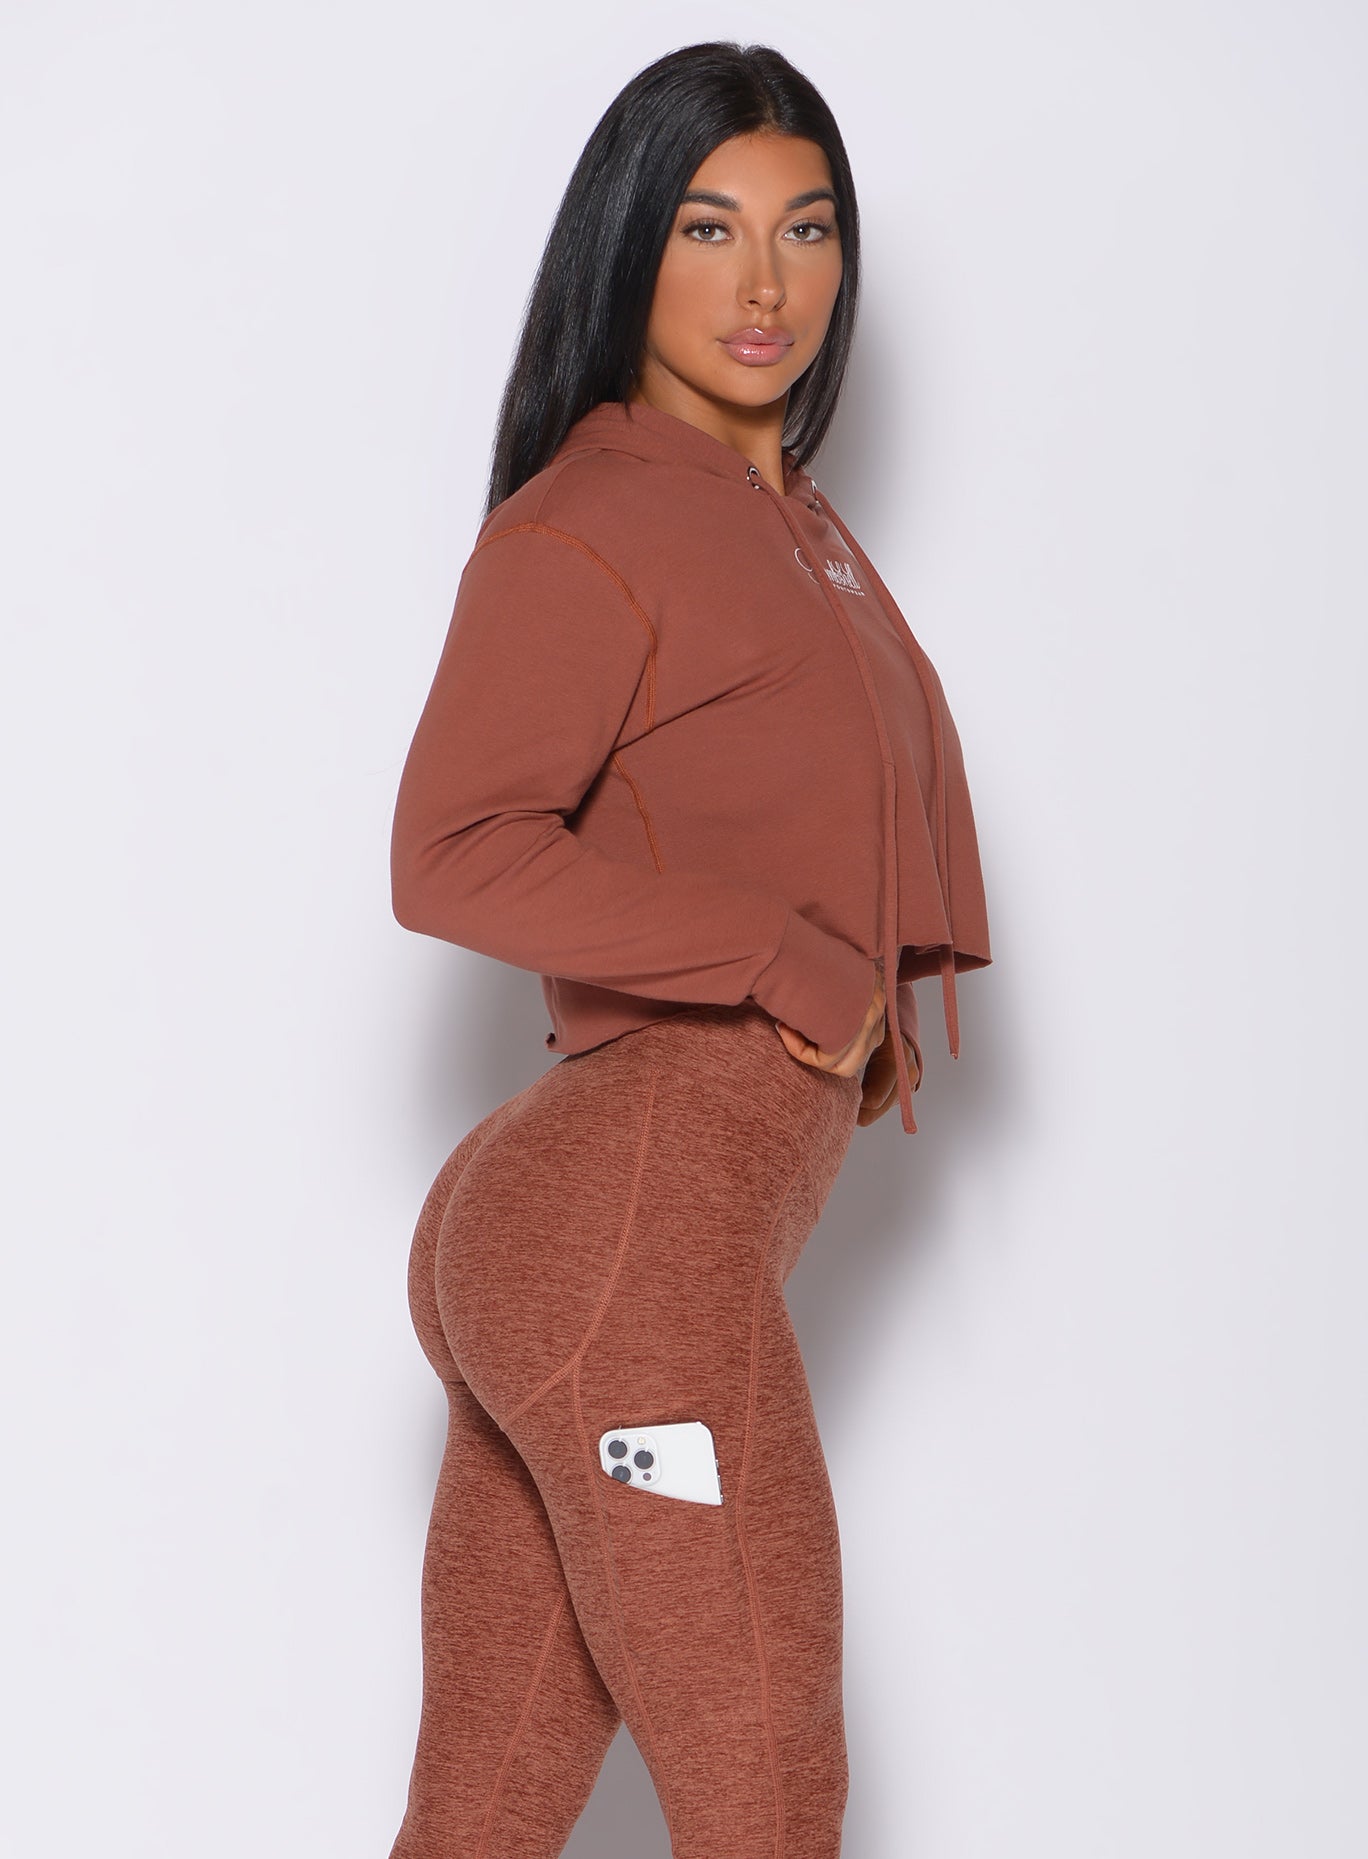 Right side profile view of a model in our bombshell hoodie in caramel color and a matching leggings